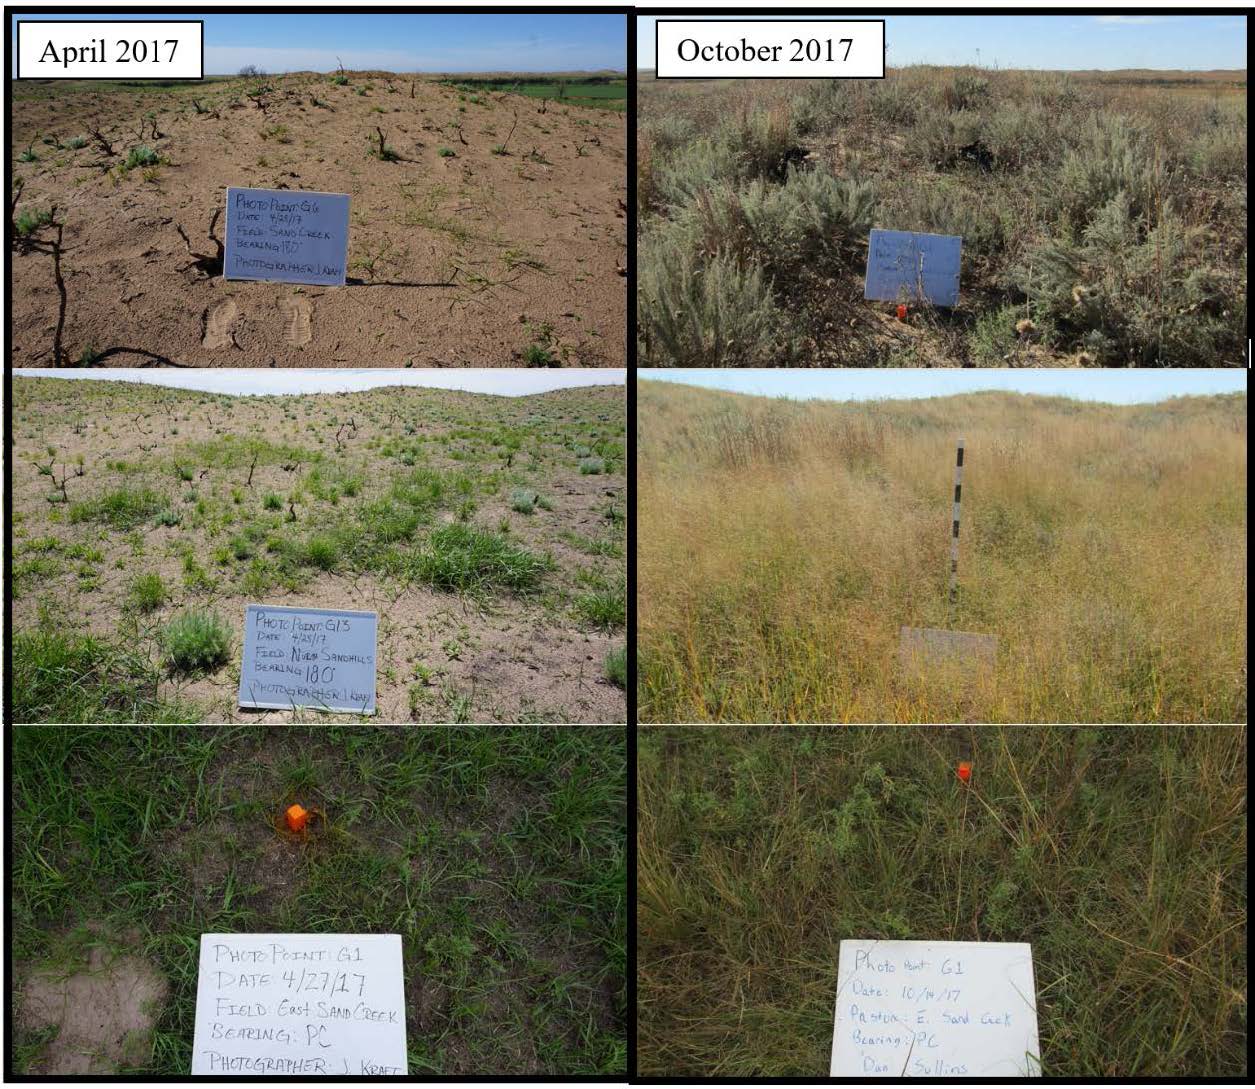 Photo points collected in Clark County, Kansas, on the Gardiner ranch in April 2017 (a month after the fire) and in the following October 2017. Photos on the left are from the same location and facing the same direction as photos on the right.